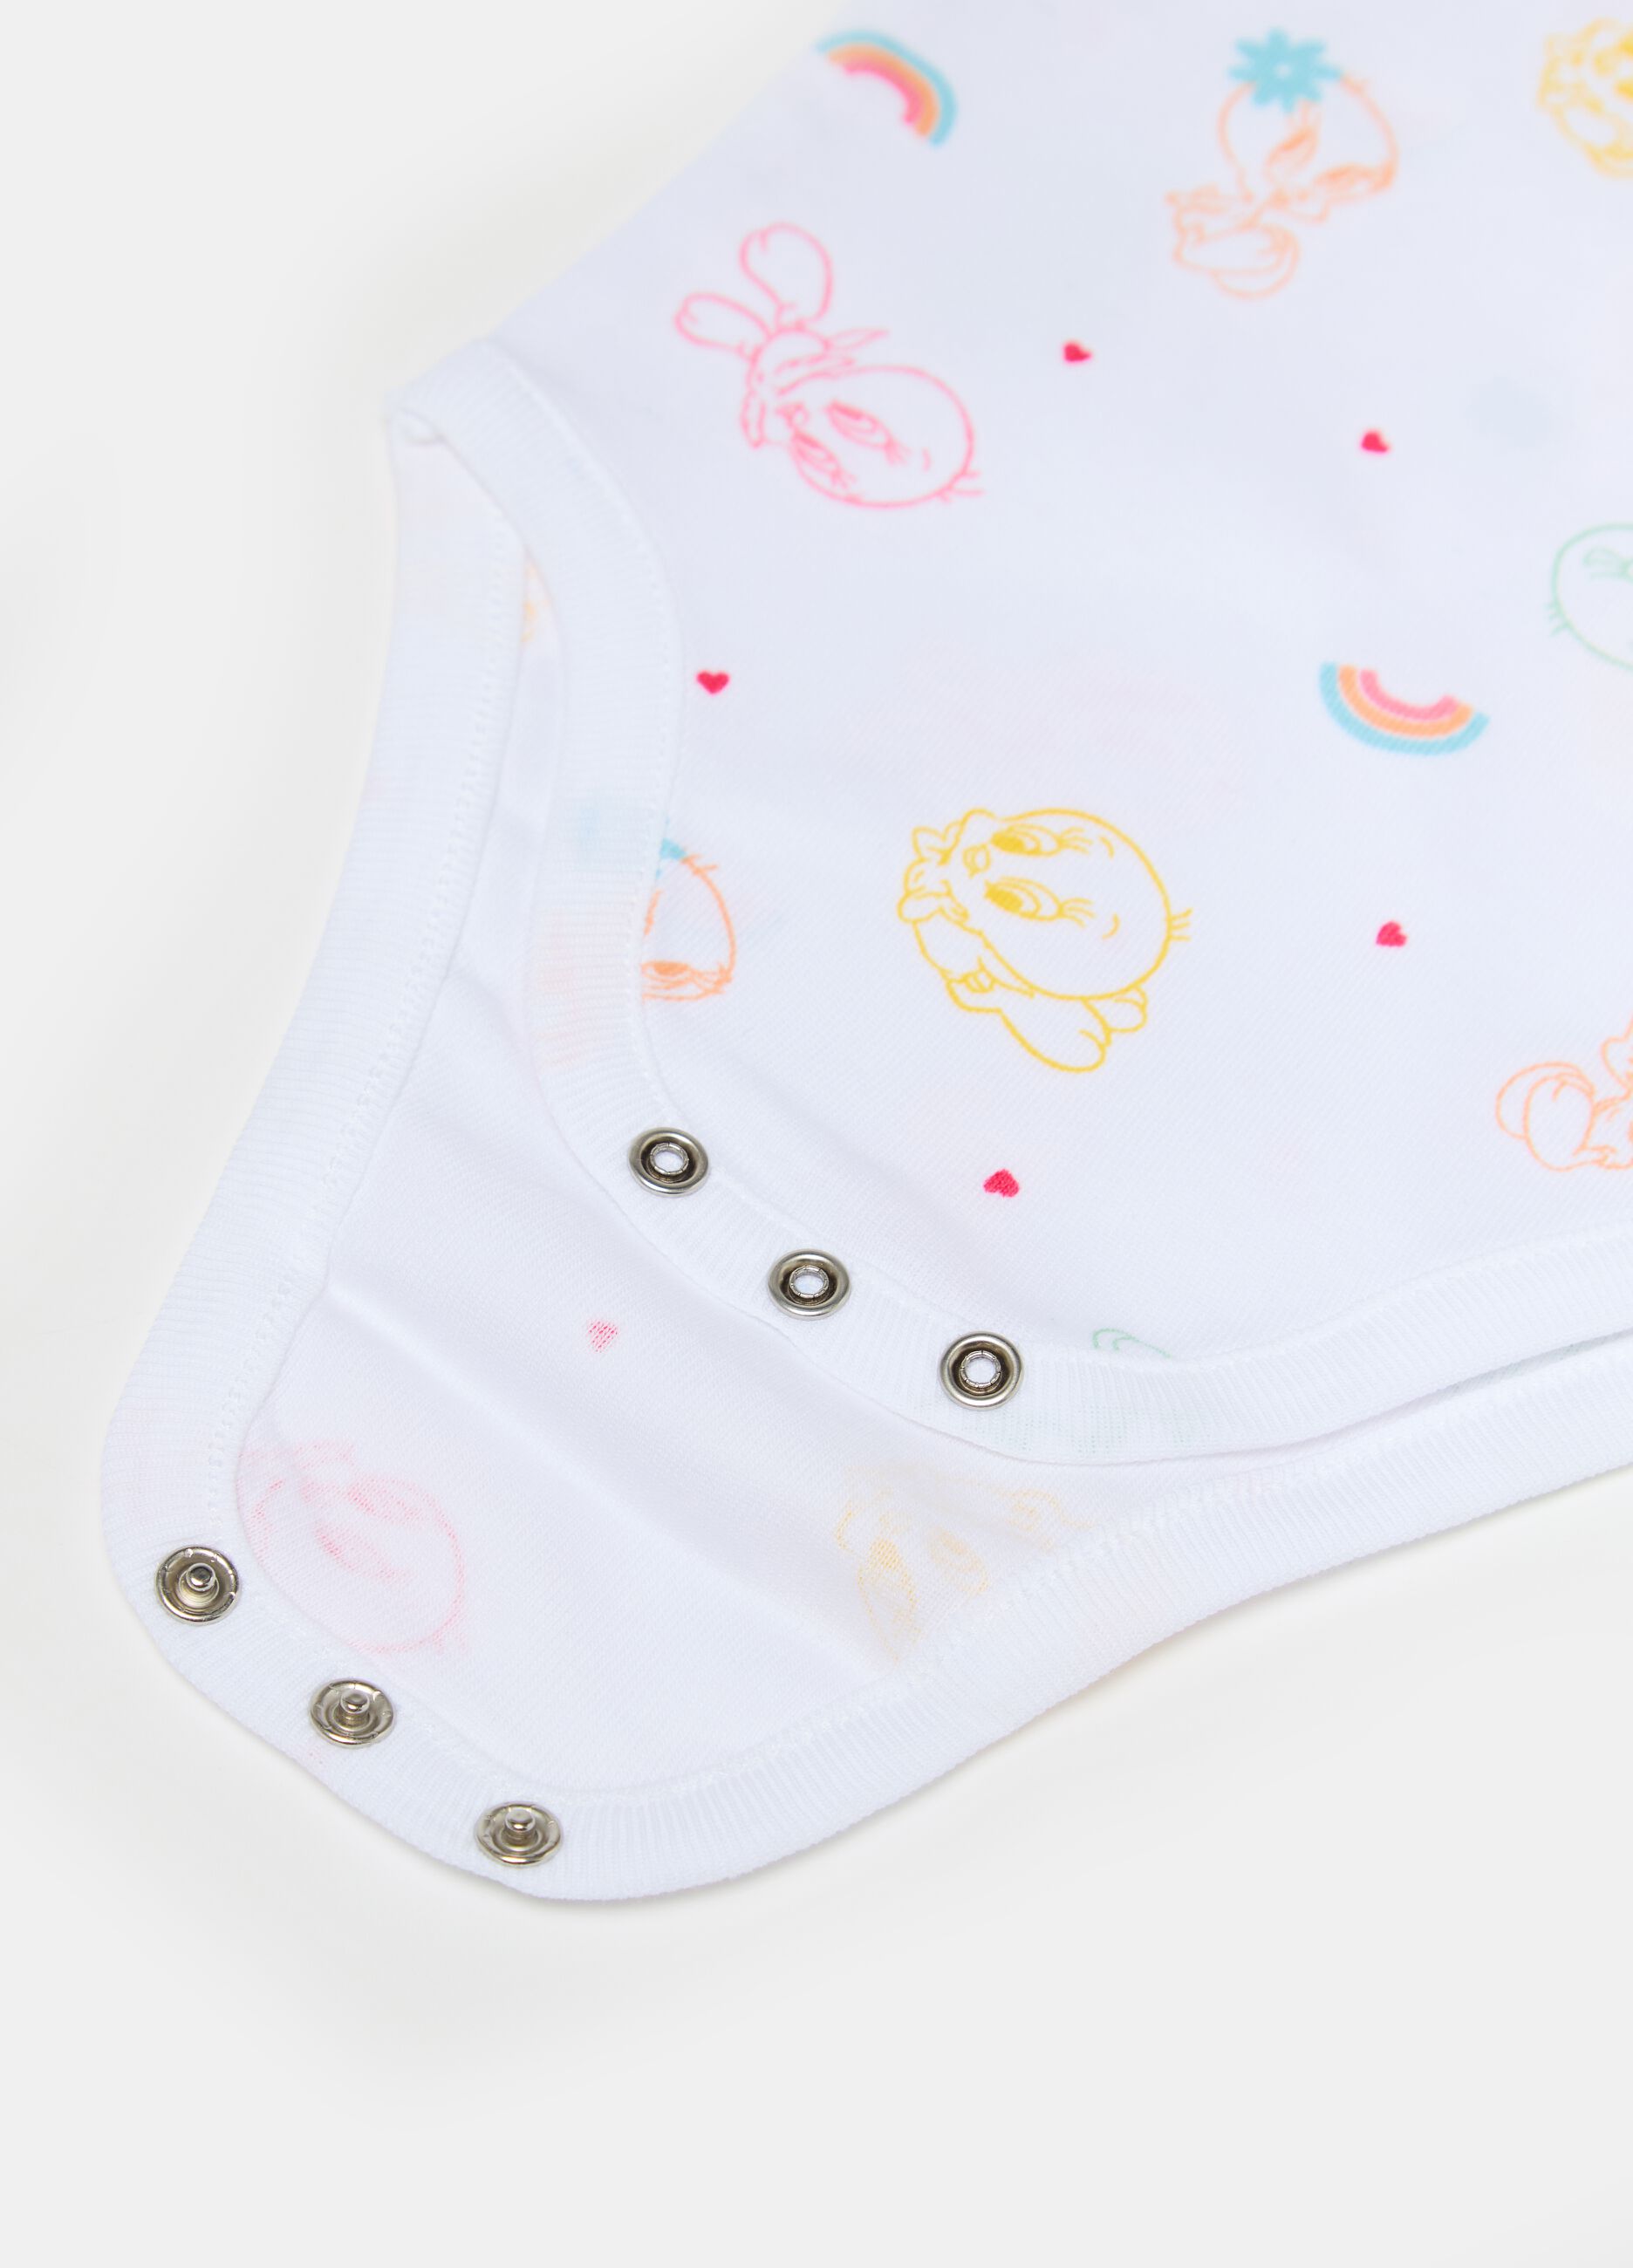 Two-pack organic cotton bodysuits with Tweetie Pie print